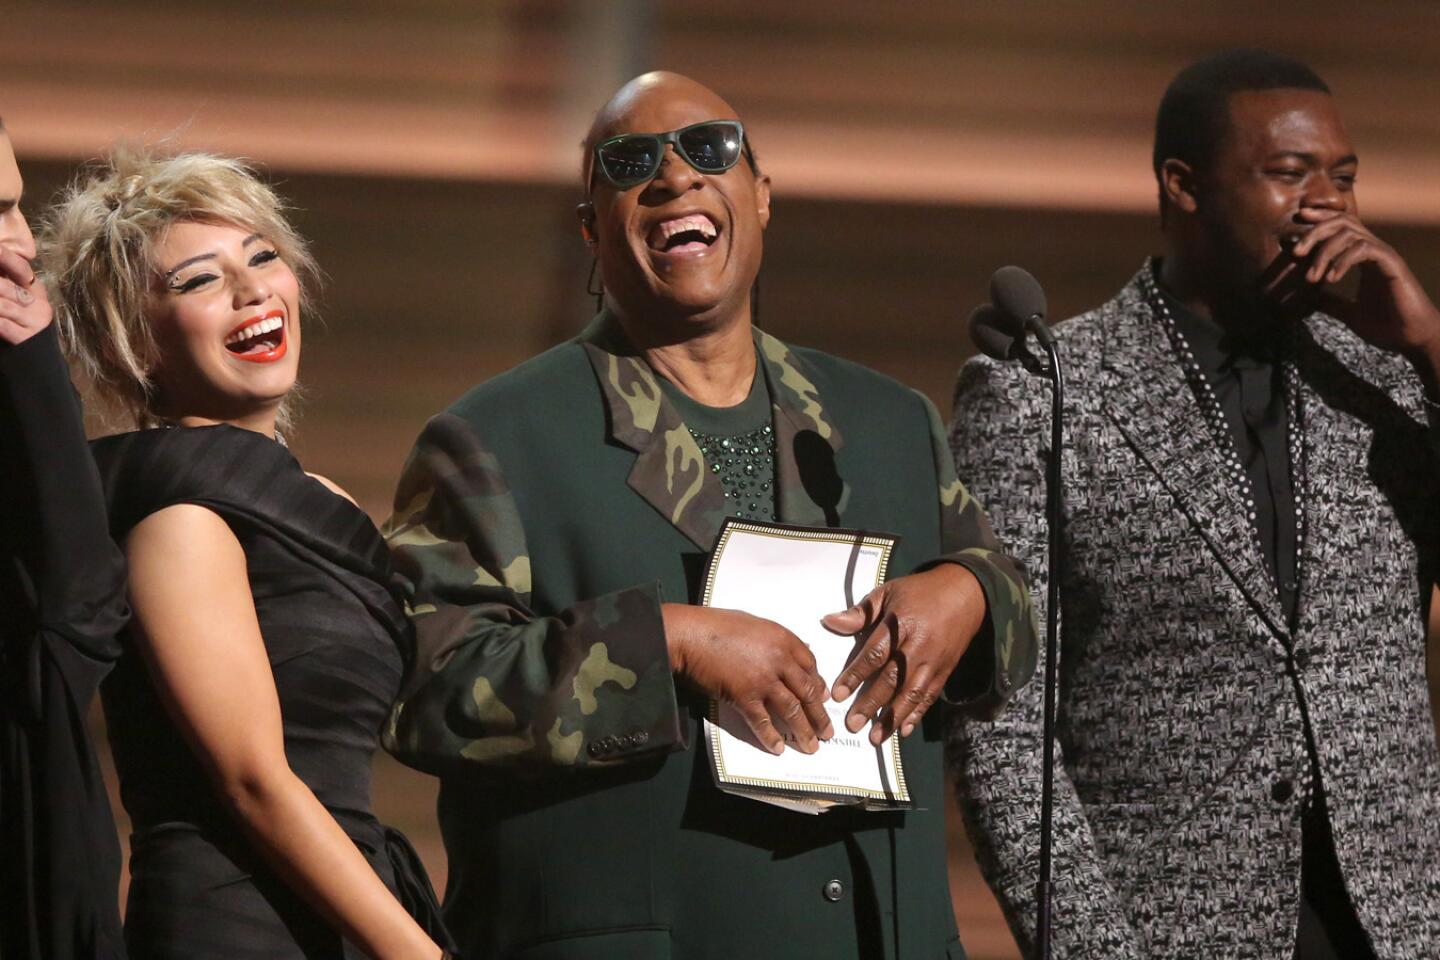 Stevie Wonder, center, and Mitch Grassing, left, Kristin Maldonado and Kevin Olusola of Pentatonix present the award for song of the year.